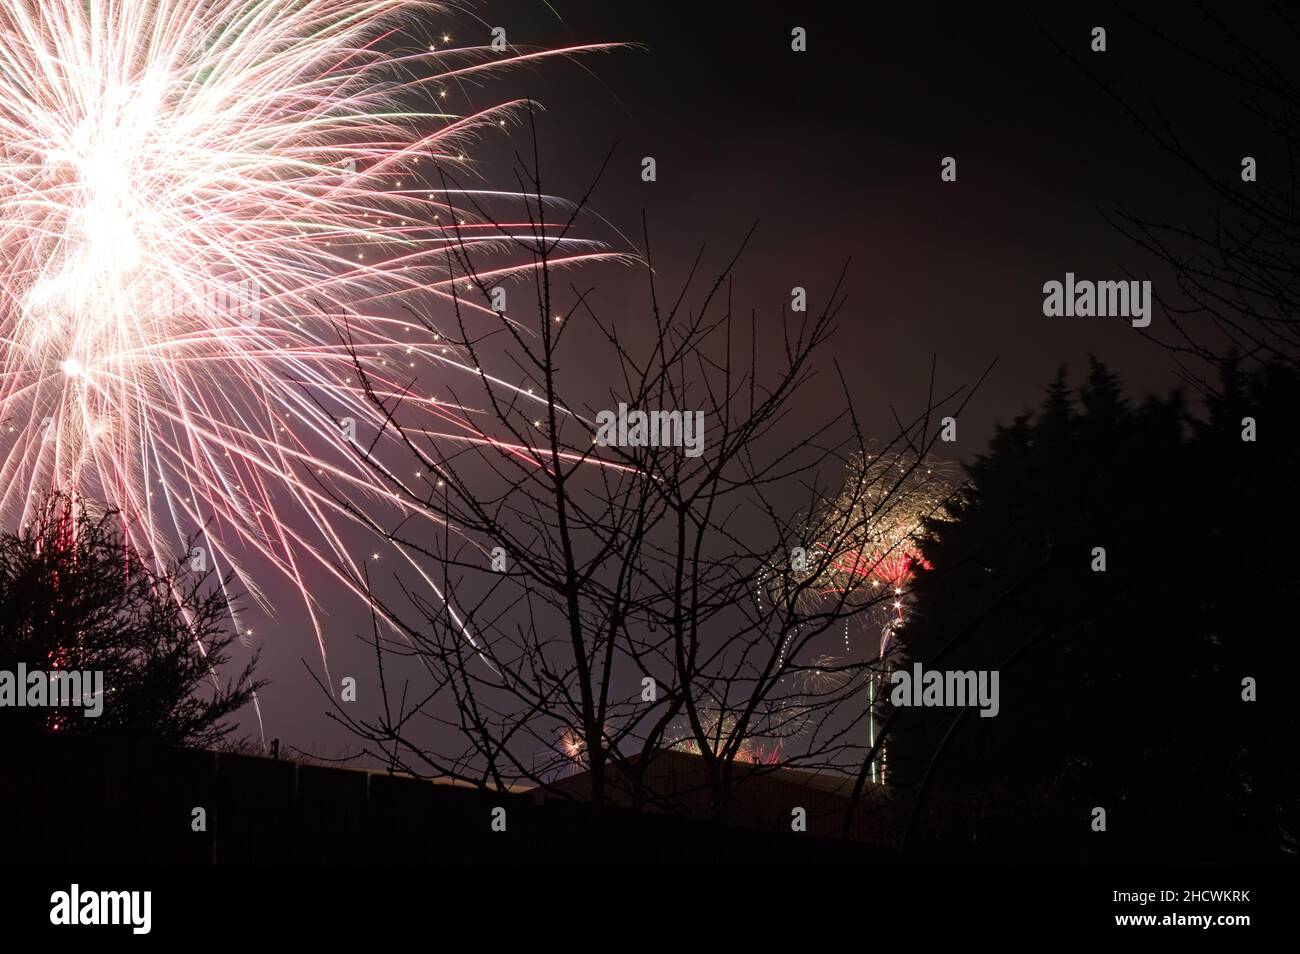 View from a garden of colourful fireworks in the night sky celebrating the new year of 2022 Stock Photo